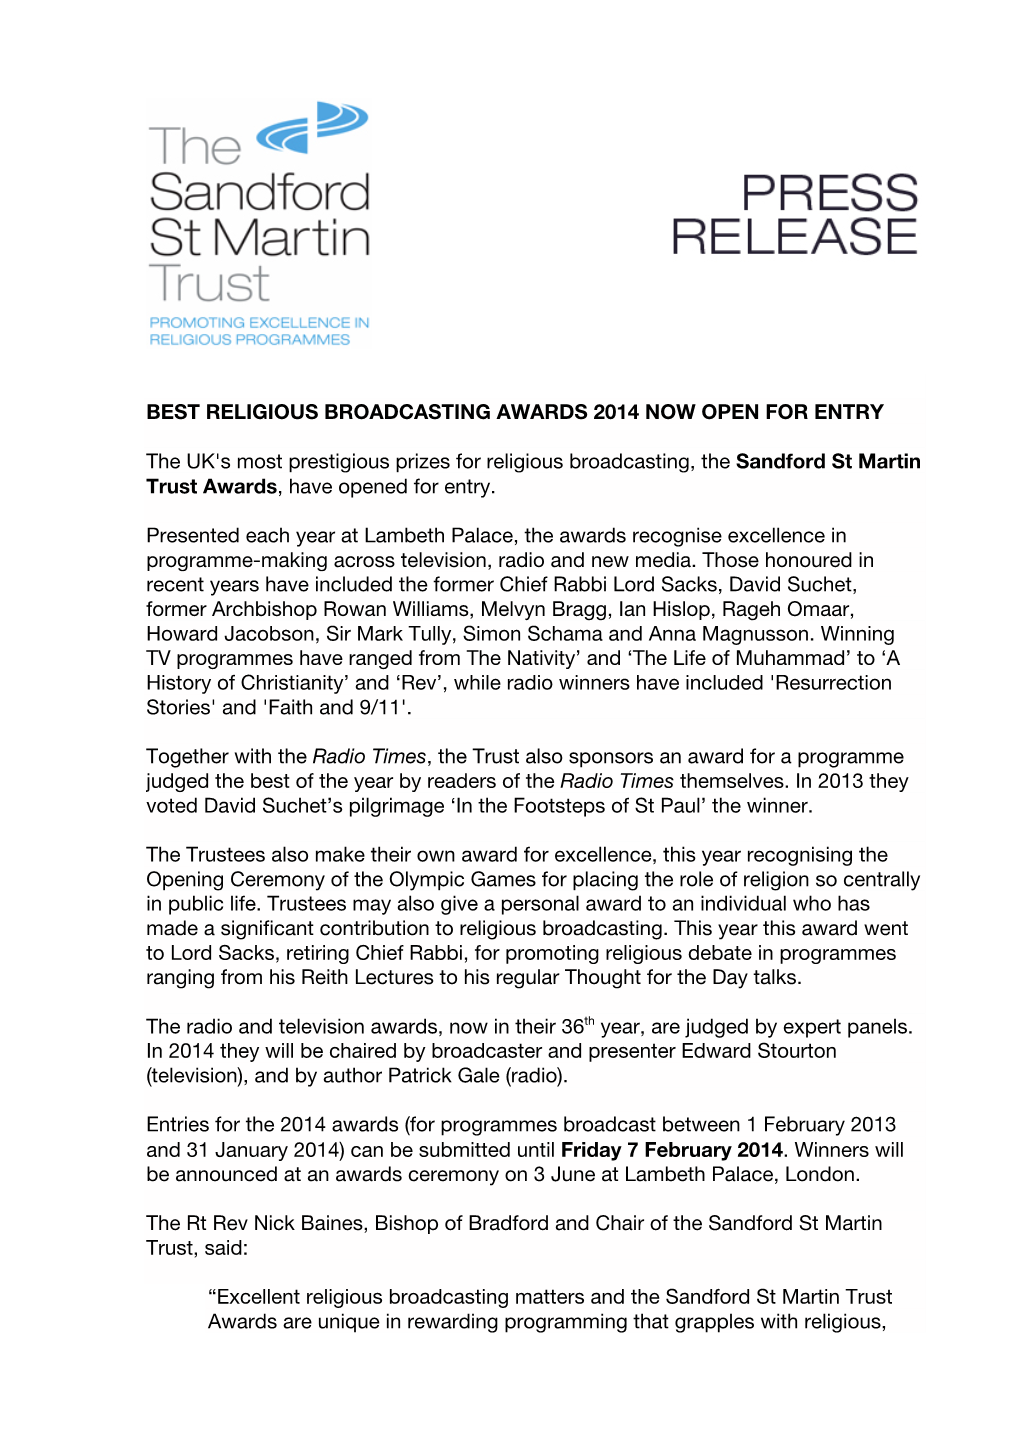 Best Religious Broadcasting Awards 2014 Now Open for Entry